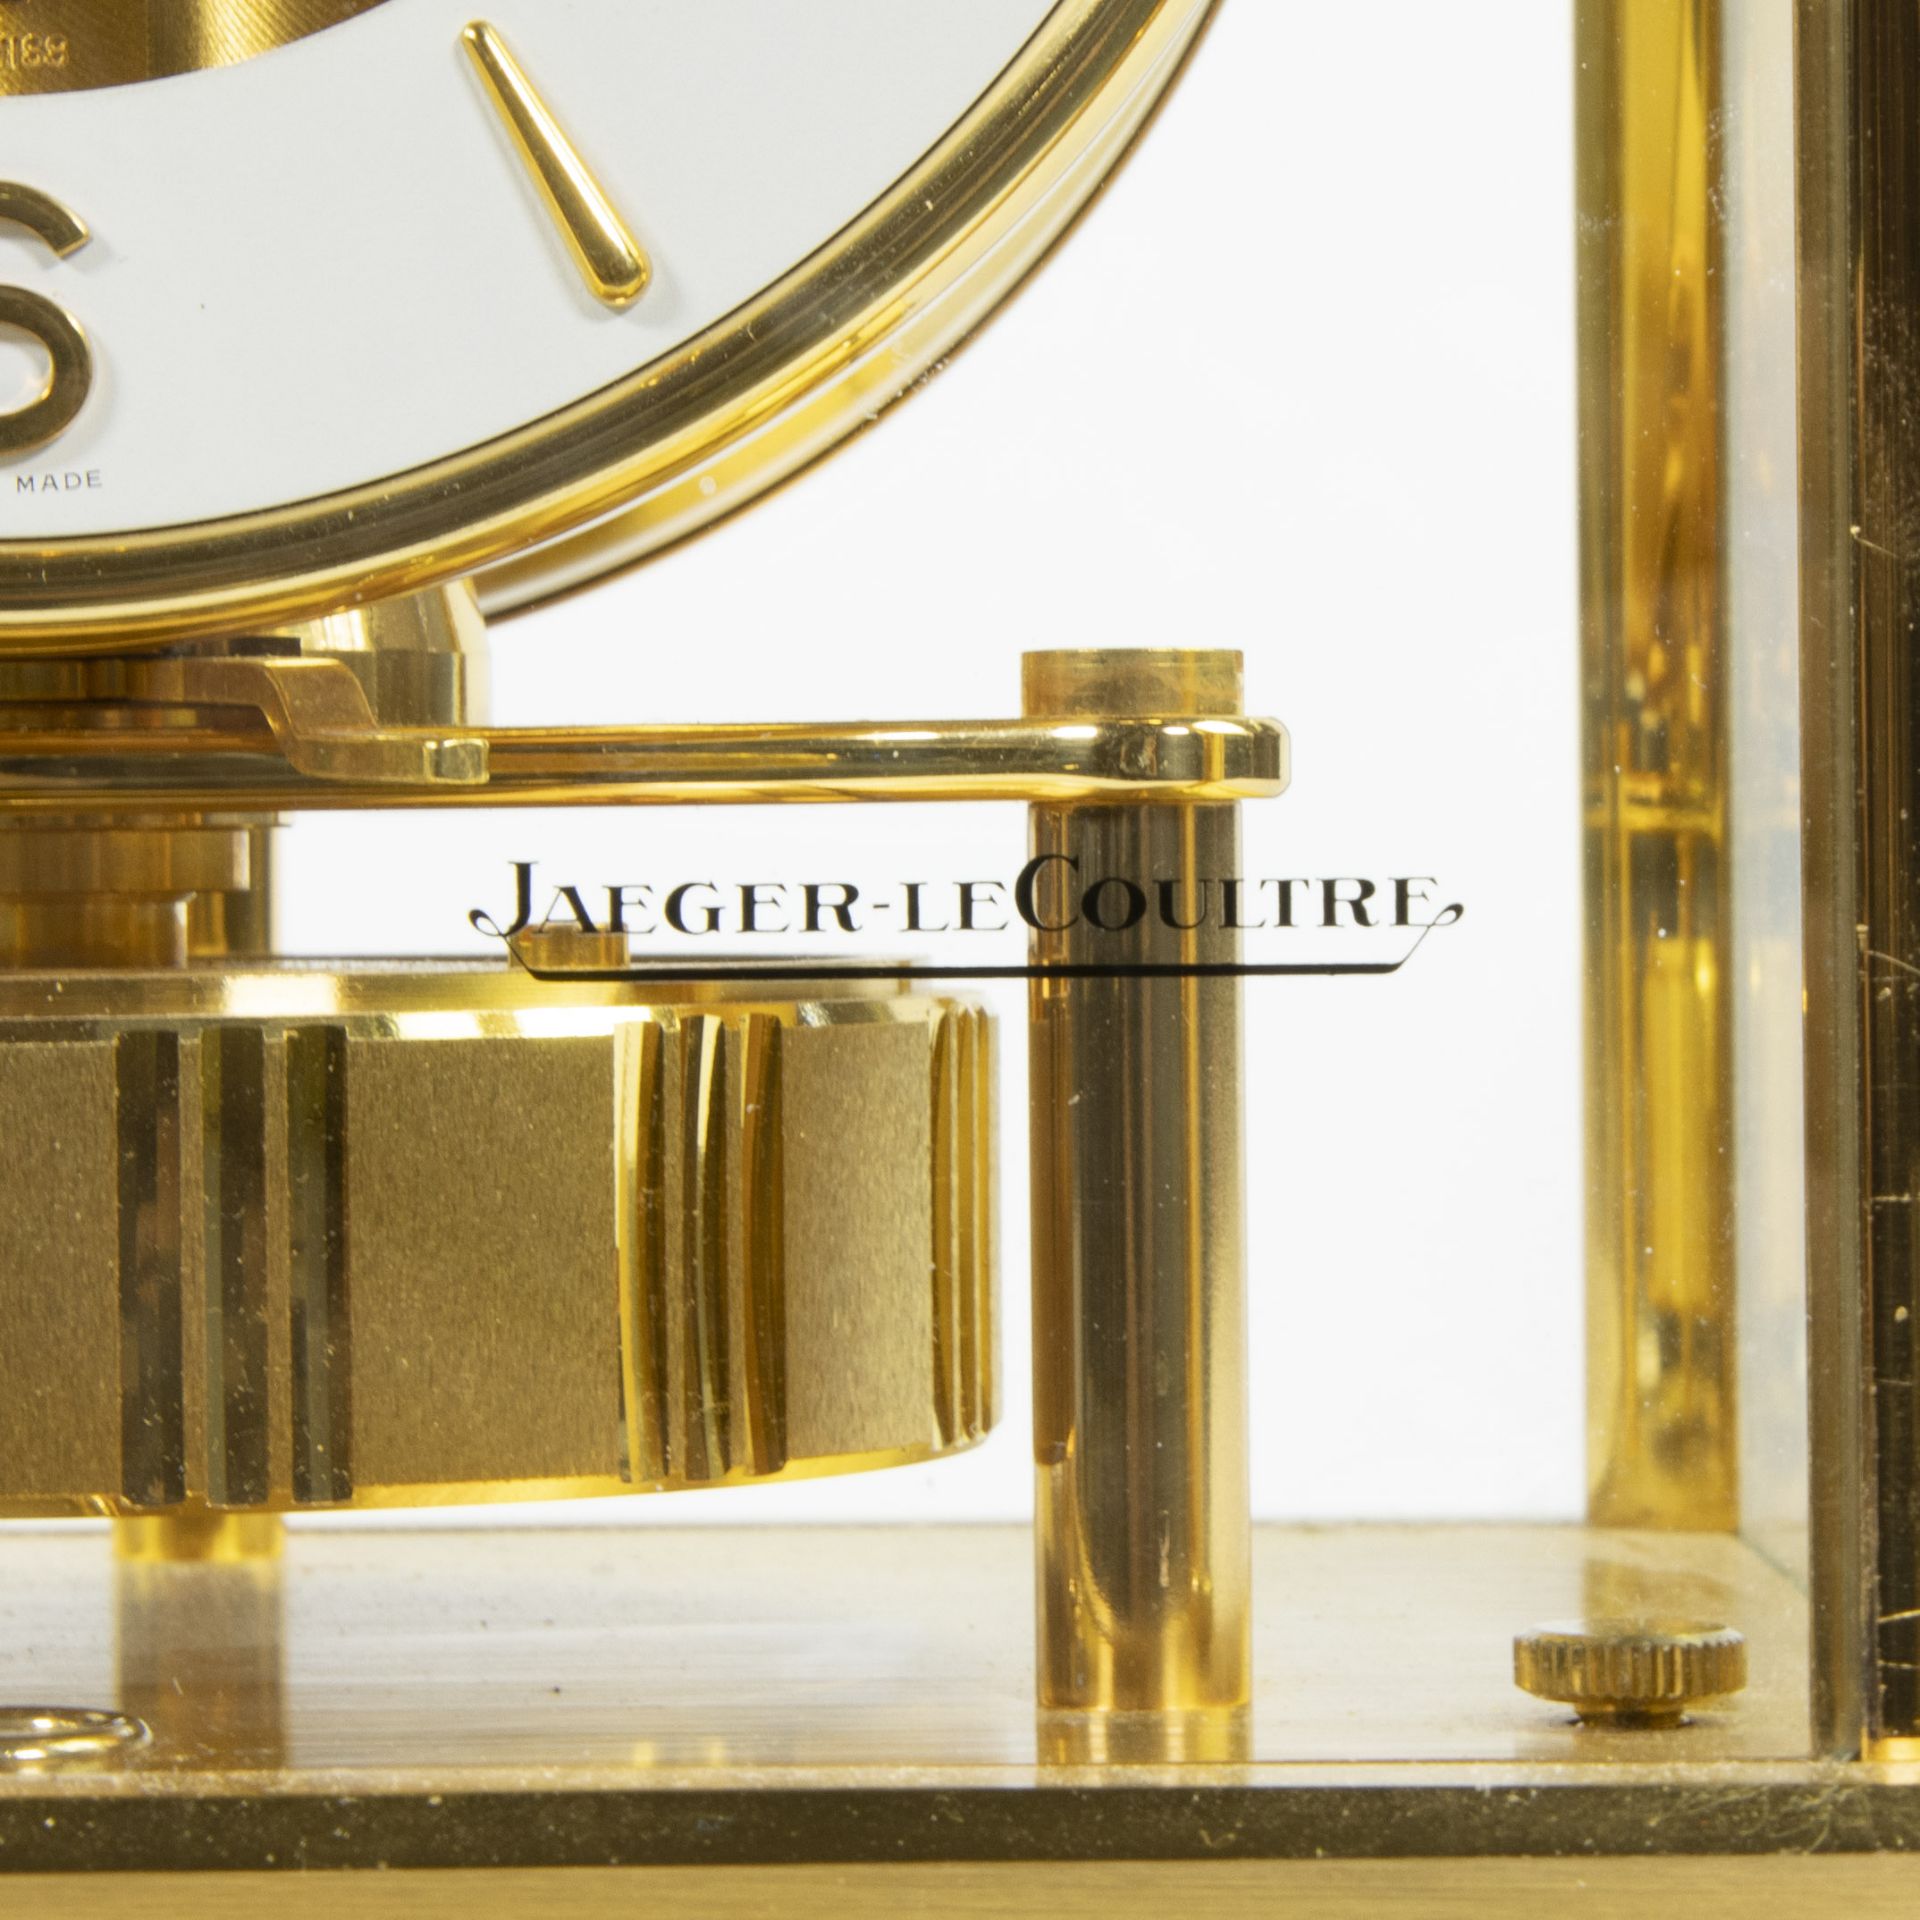 Jaeger-LeCoultre Atmos clock Swiss made - Image 2 of 6